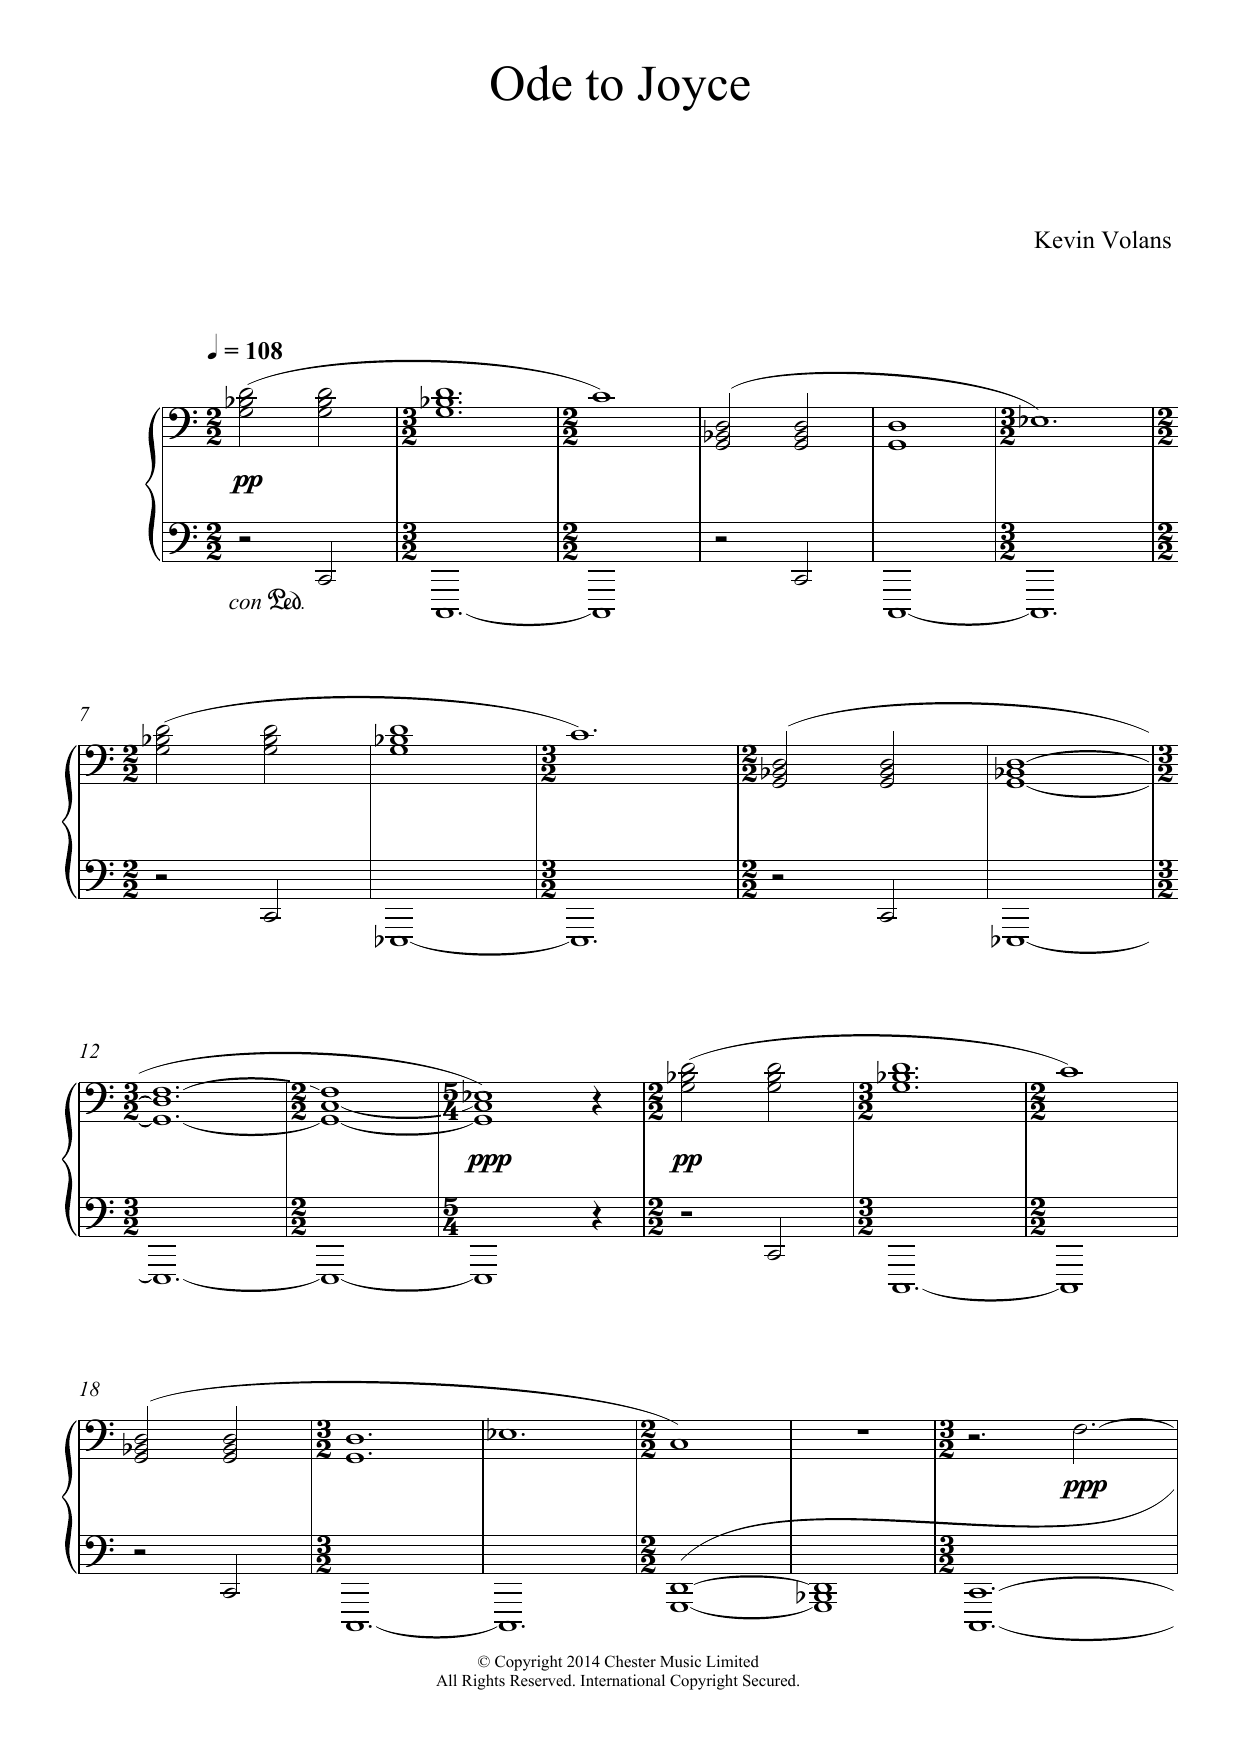 Download Kevin Volans Ode To Joyce (From 'Pint Sized Piano Pi Sheet Music